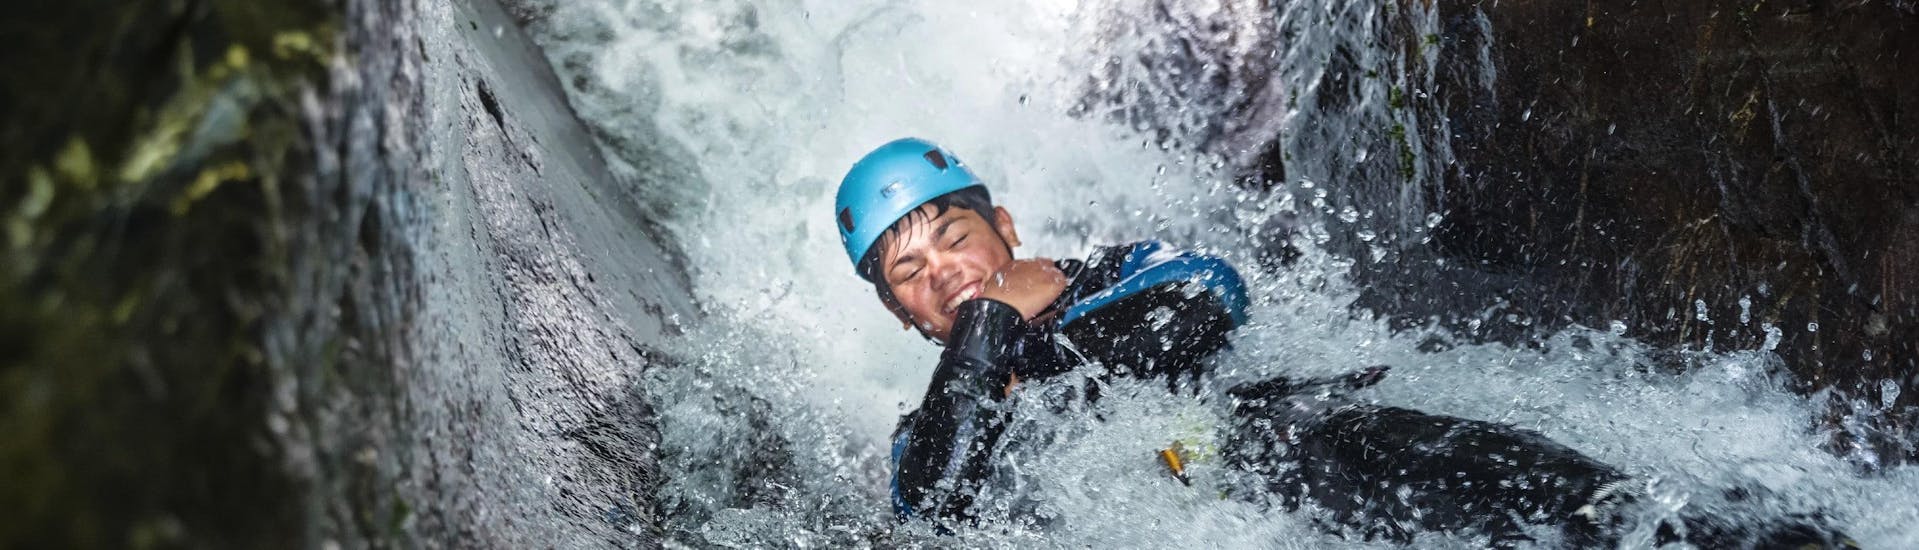 Sportliche Canyoning-Tour in Laruns - Canyon du Canceigt.